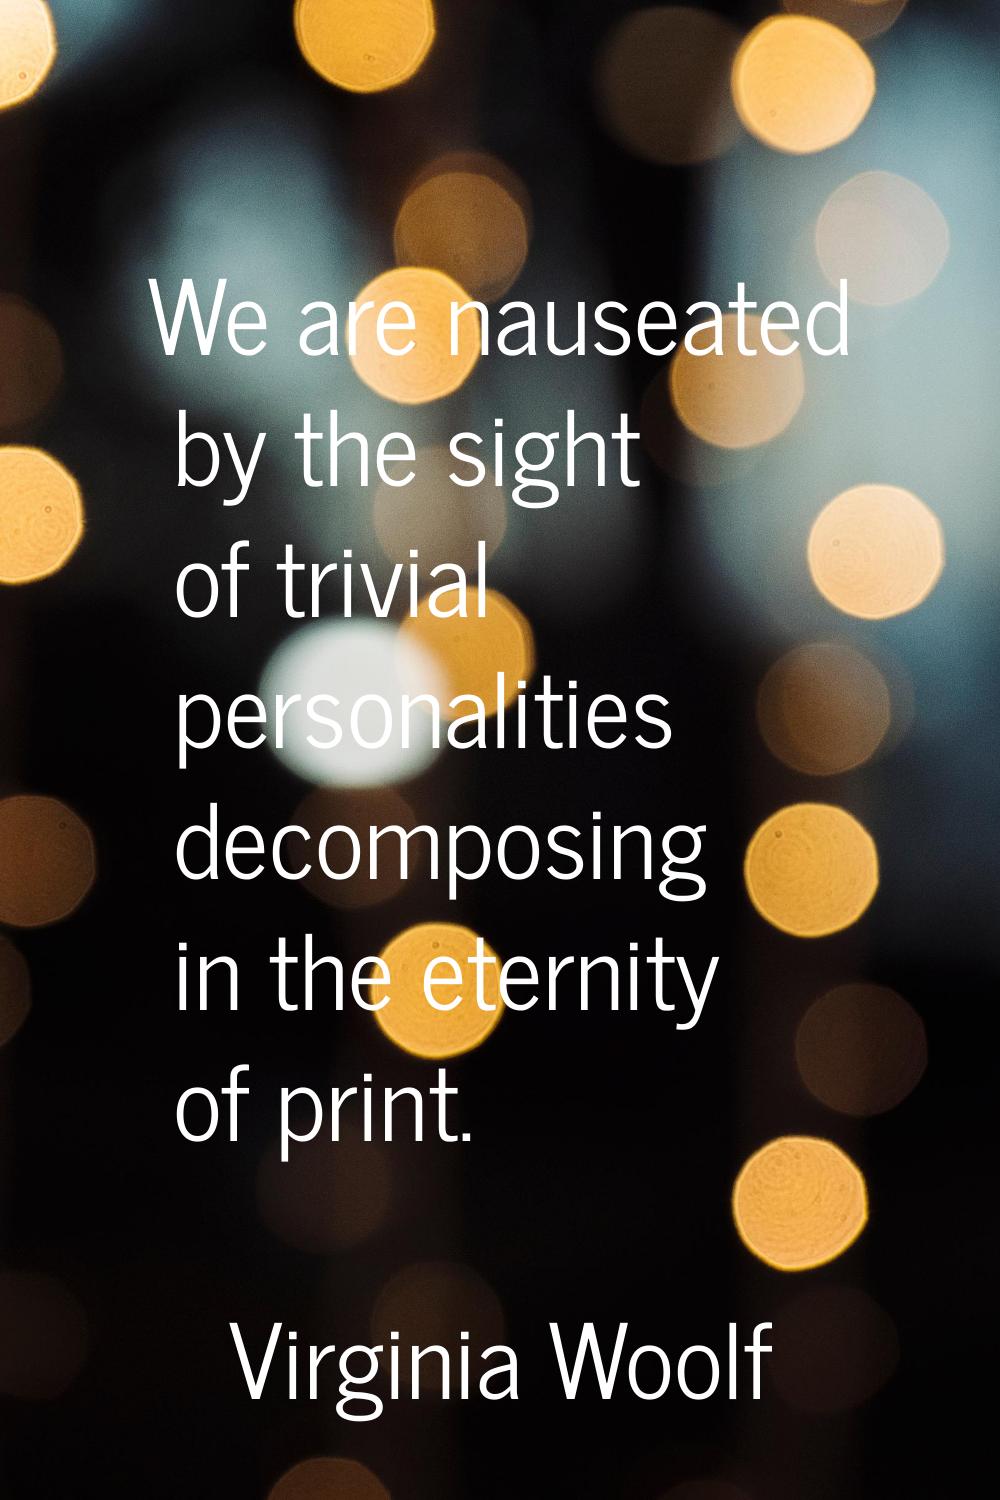 We are nauseated by the sight of trivial personalities decomposing in the eternity of print.